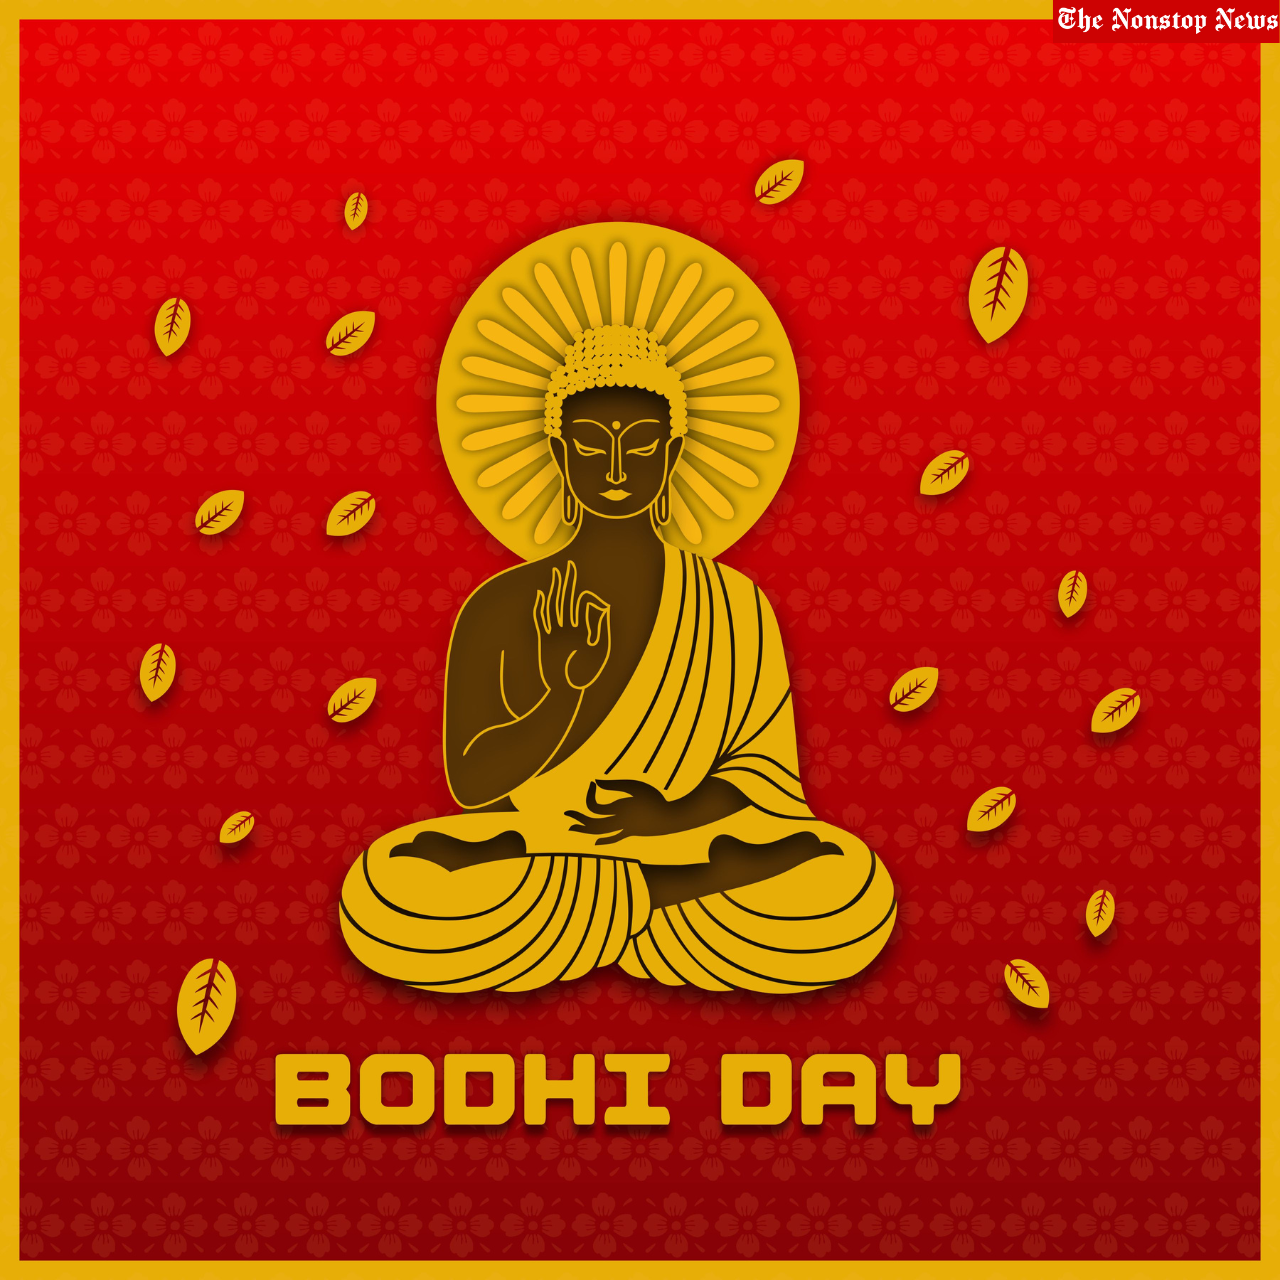 Happy Bodhi Day 2022 Greetings, Messages, Images, Wishes, Quotes, WhatsApp Status to Share